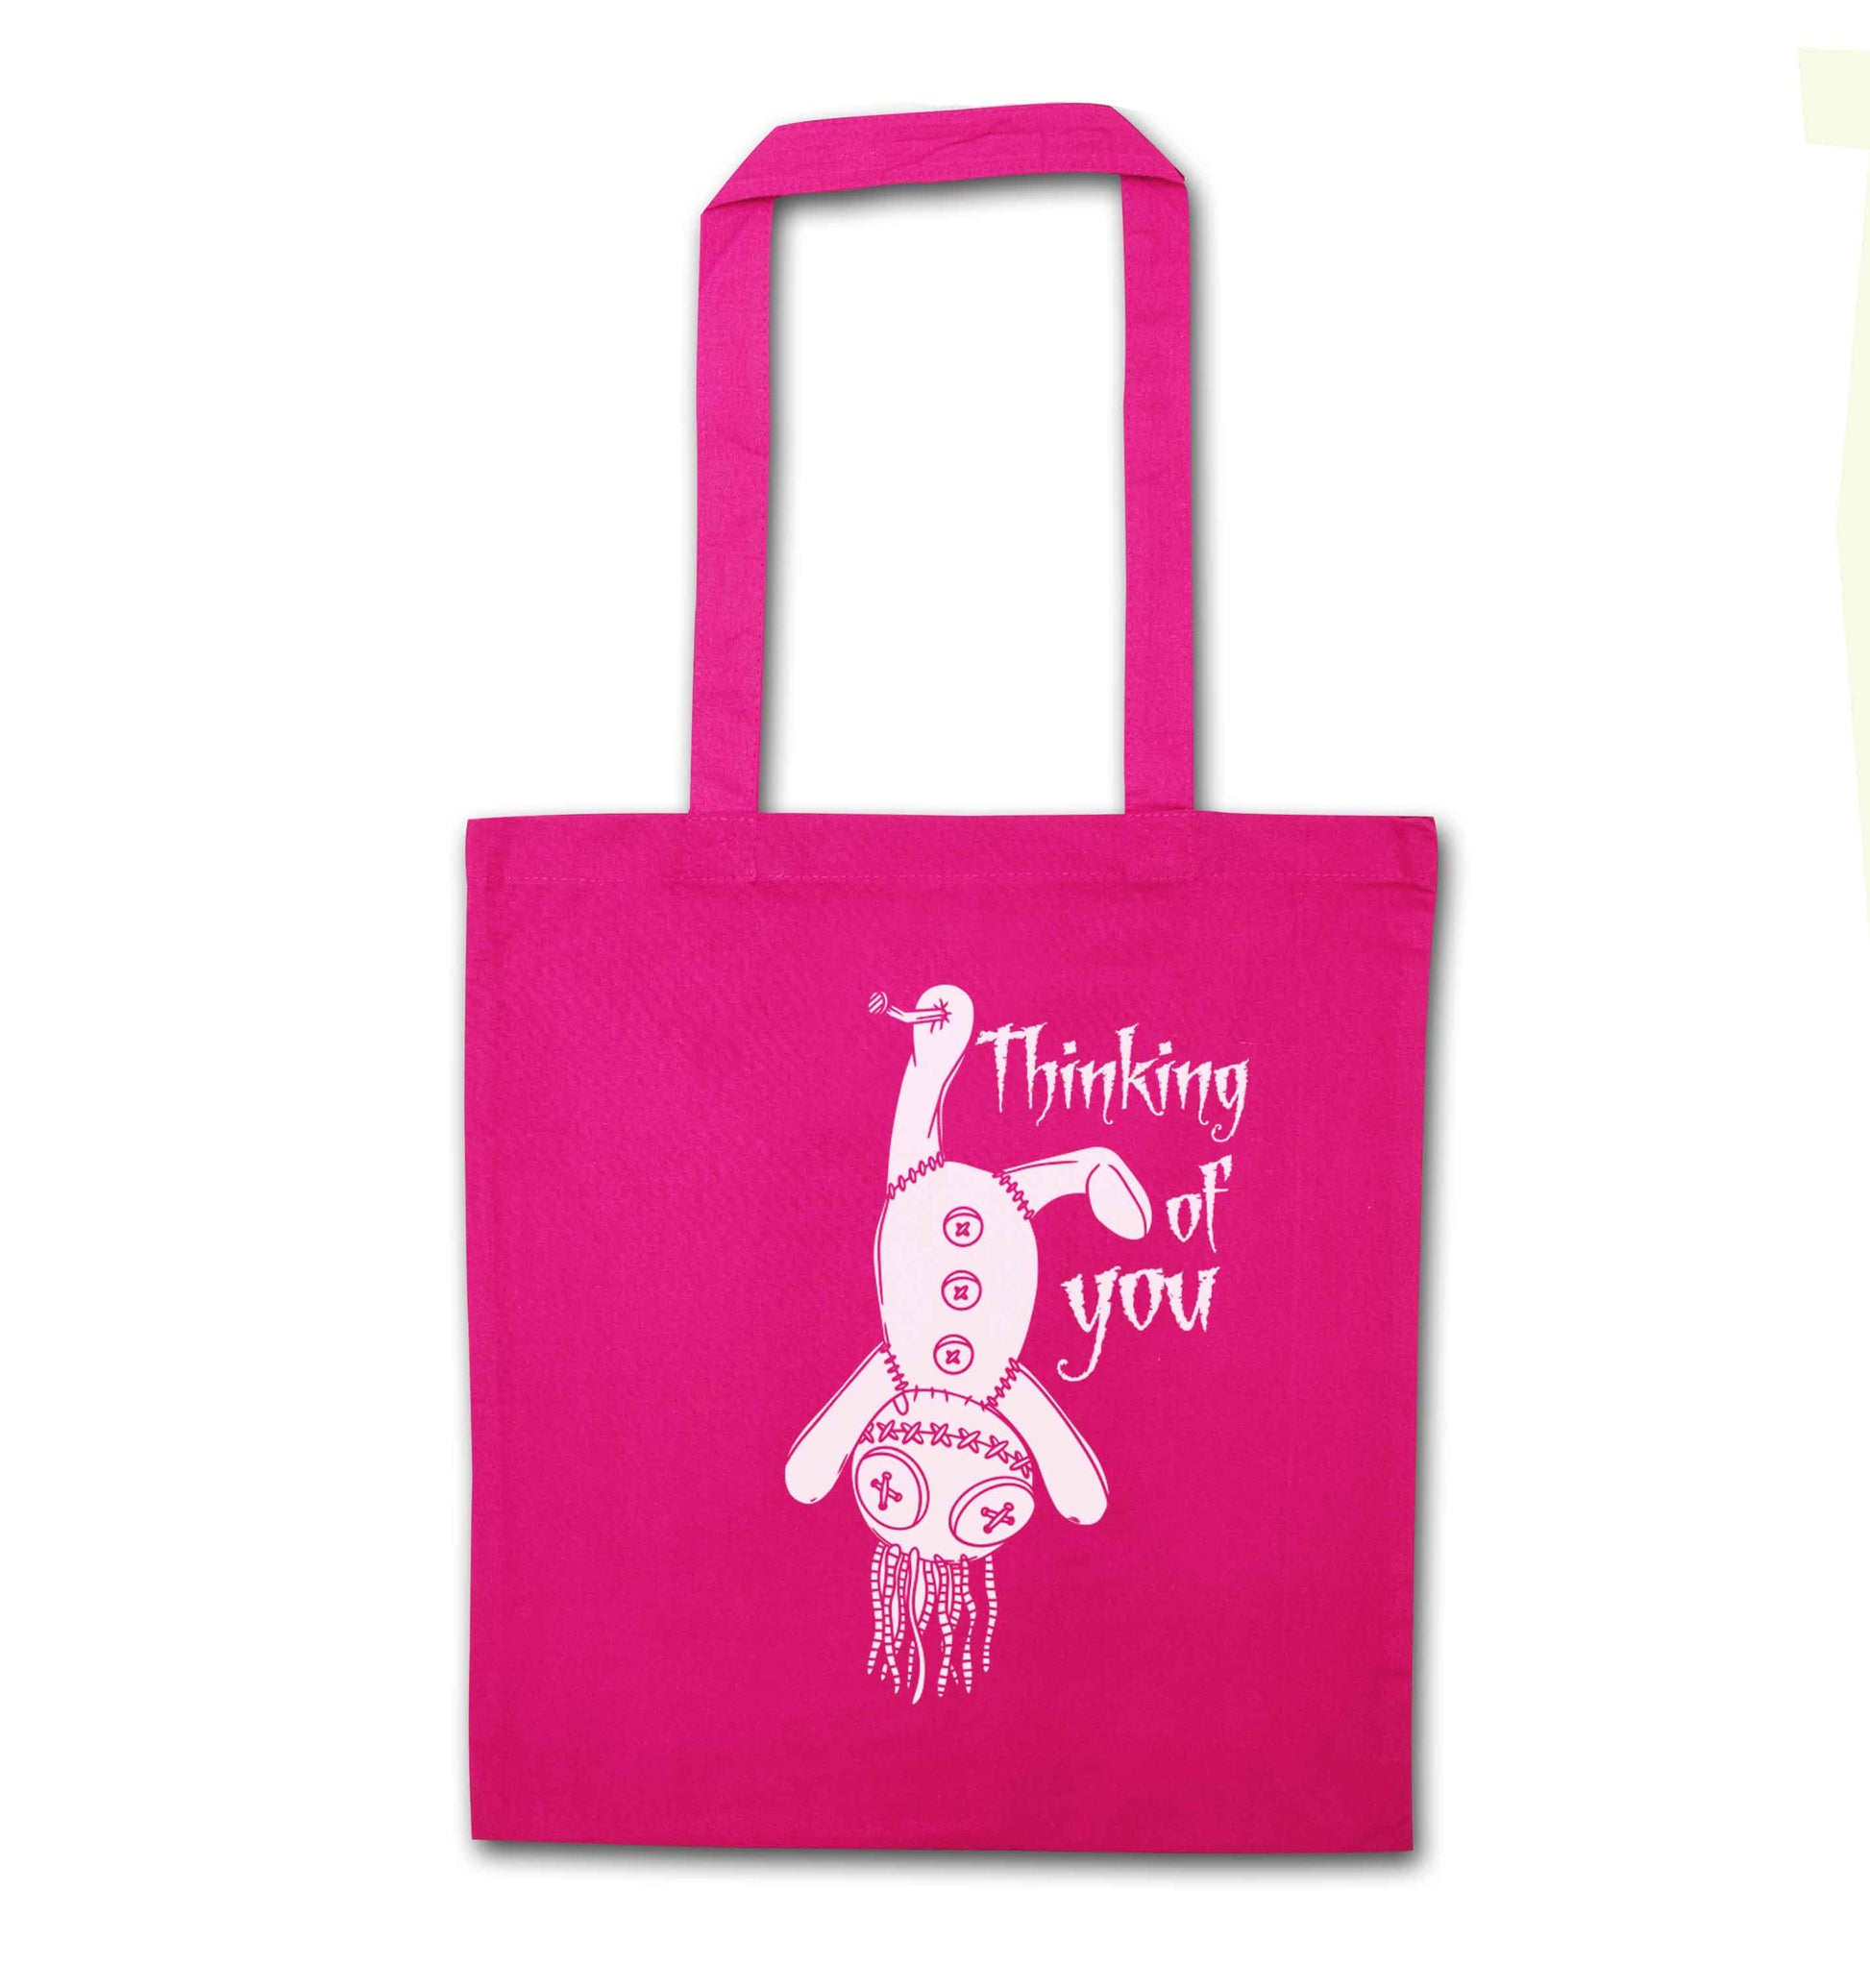 Thinking of you pink tote bag